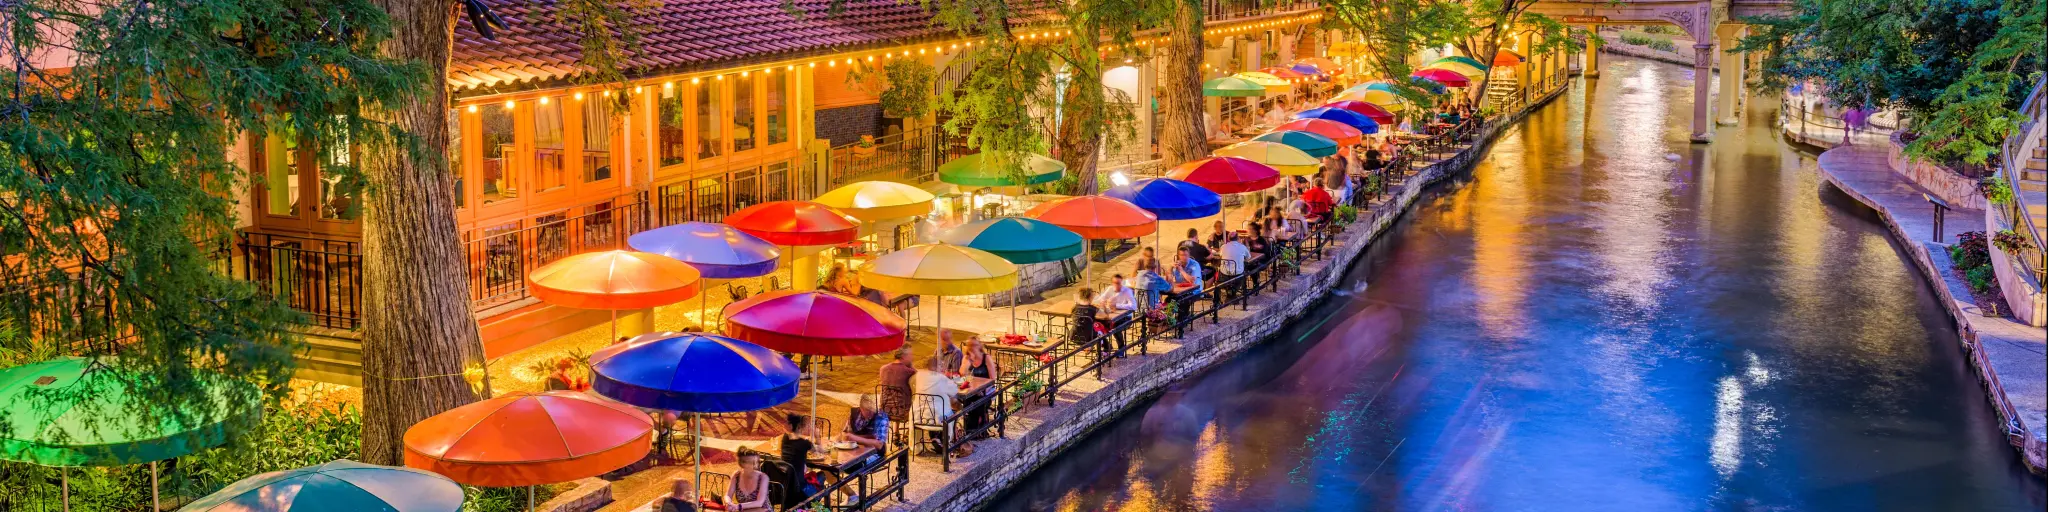 San Antonio, Texas, USA cityscape at the River Walk as the evening falls. There are colorful umbrellas on the riverside, with tables.